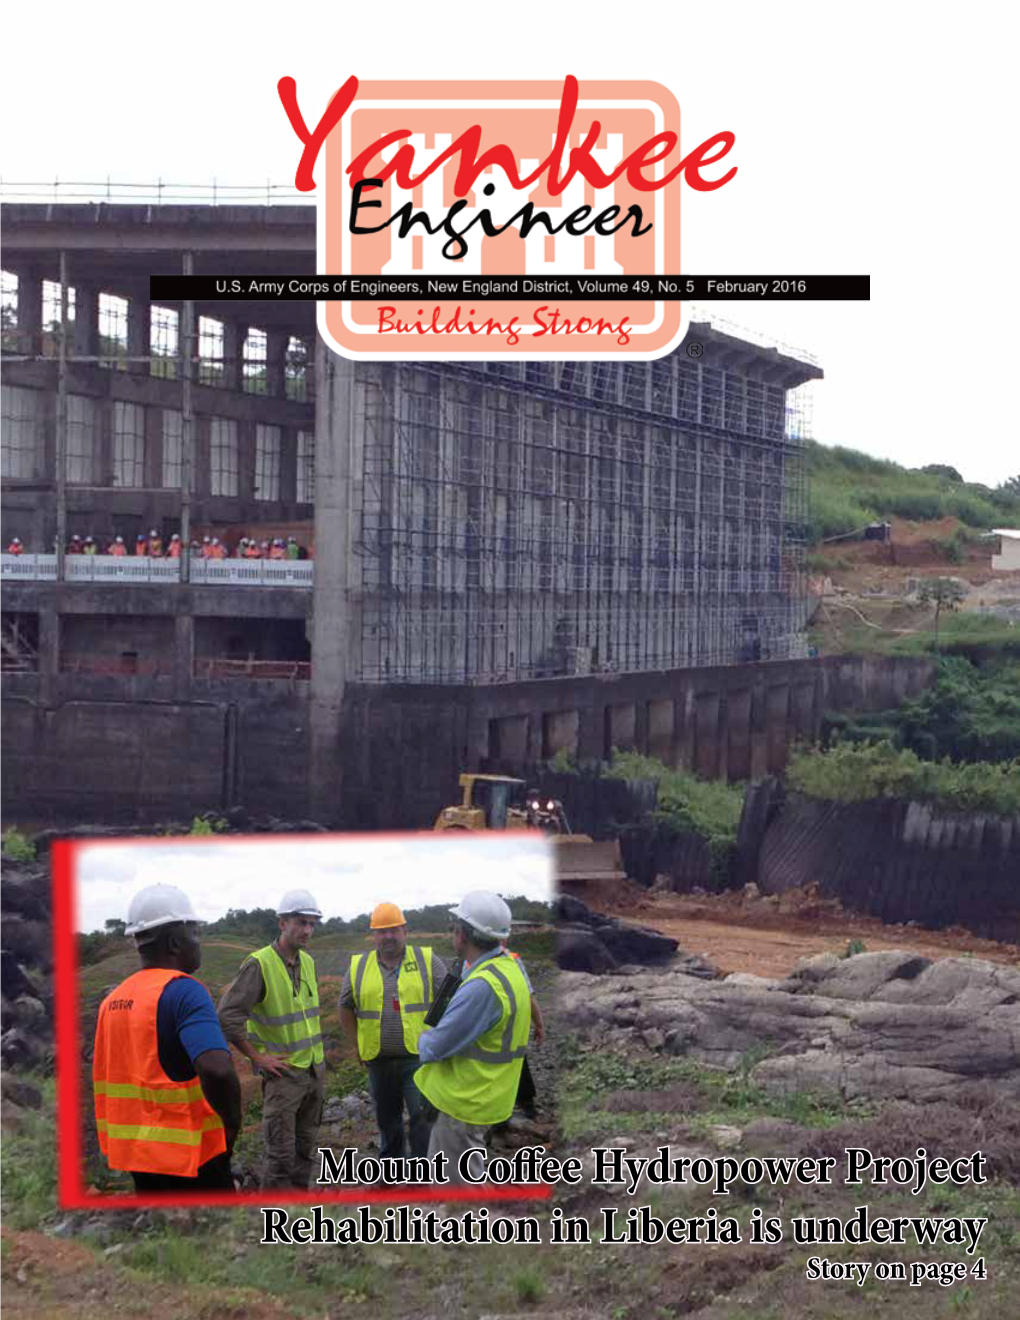 Mount Coffee Hydropower Project Rehabilitation in Liberia Is Underway Story on Page 4 YANKEE ENGINEER 2 February 2016 Yankee